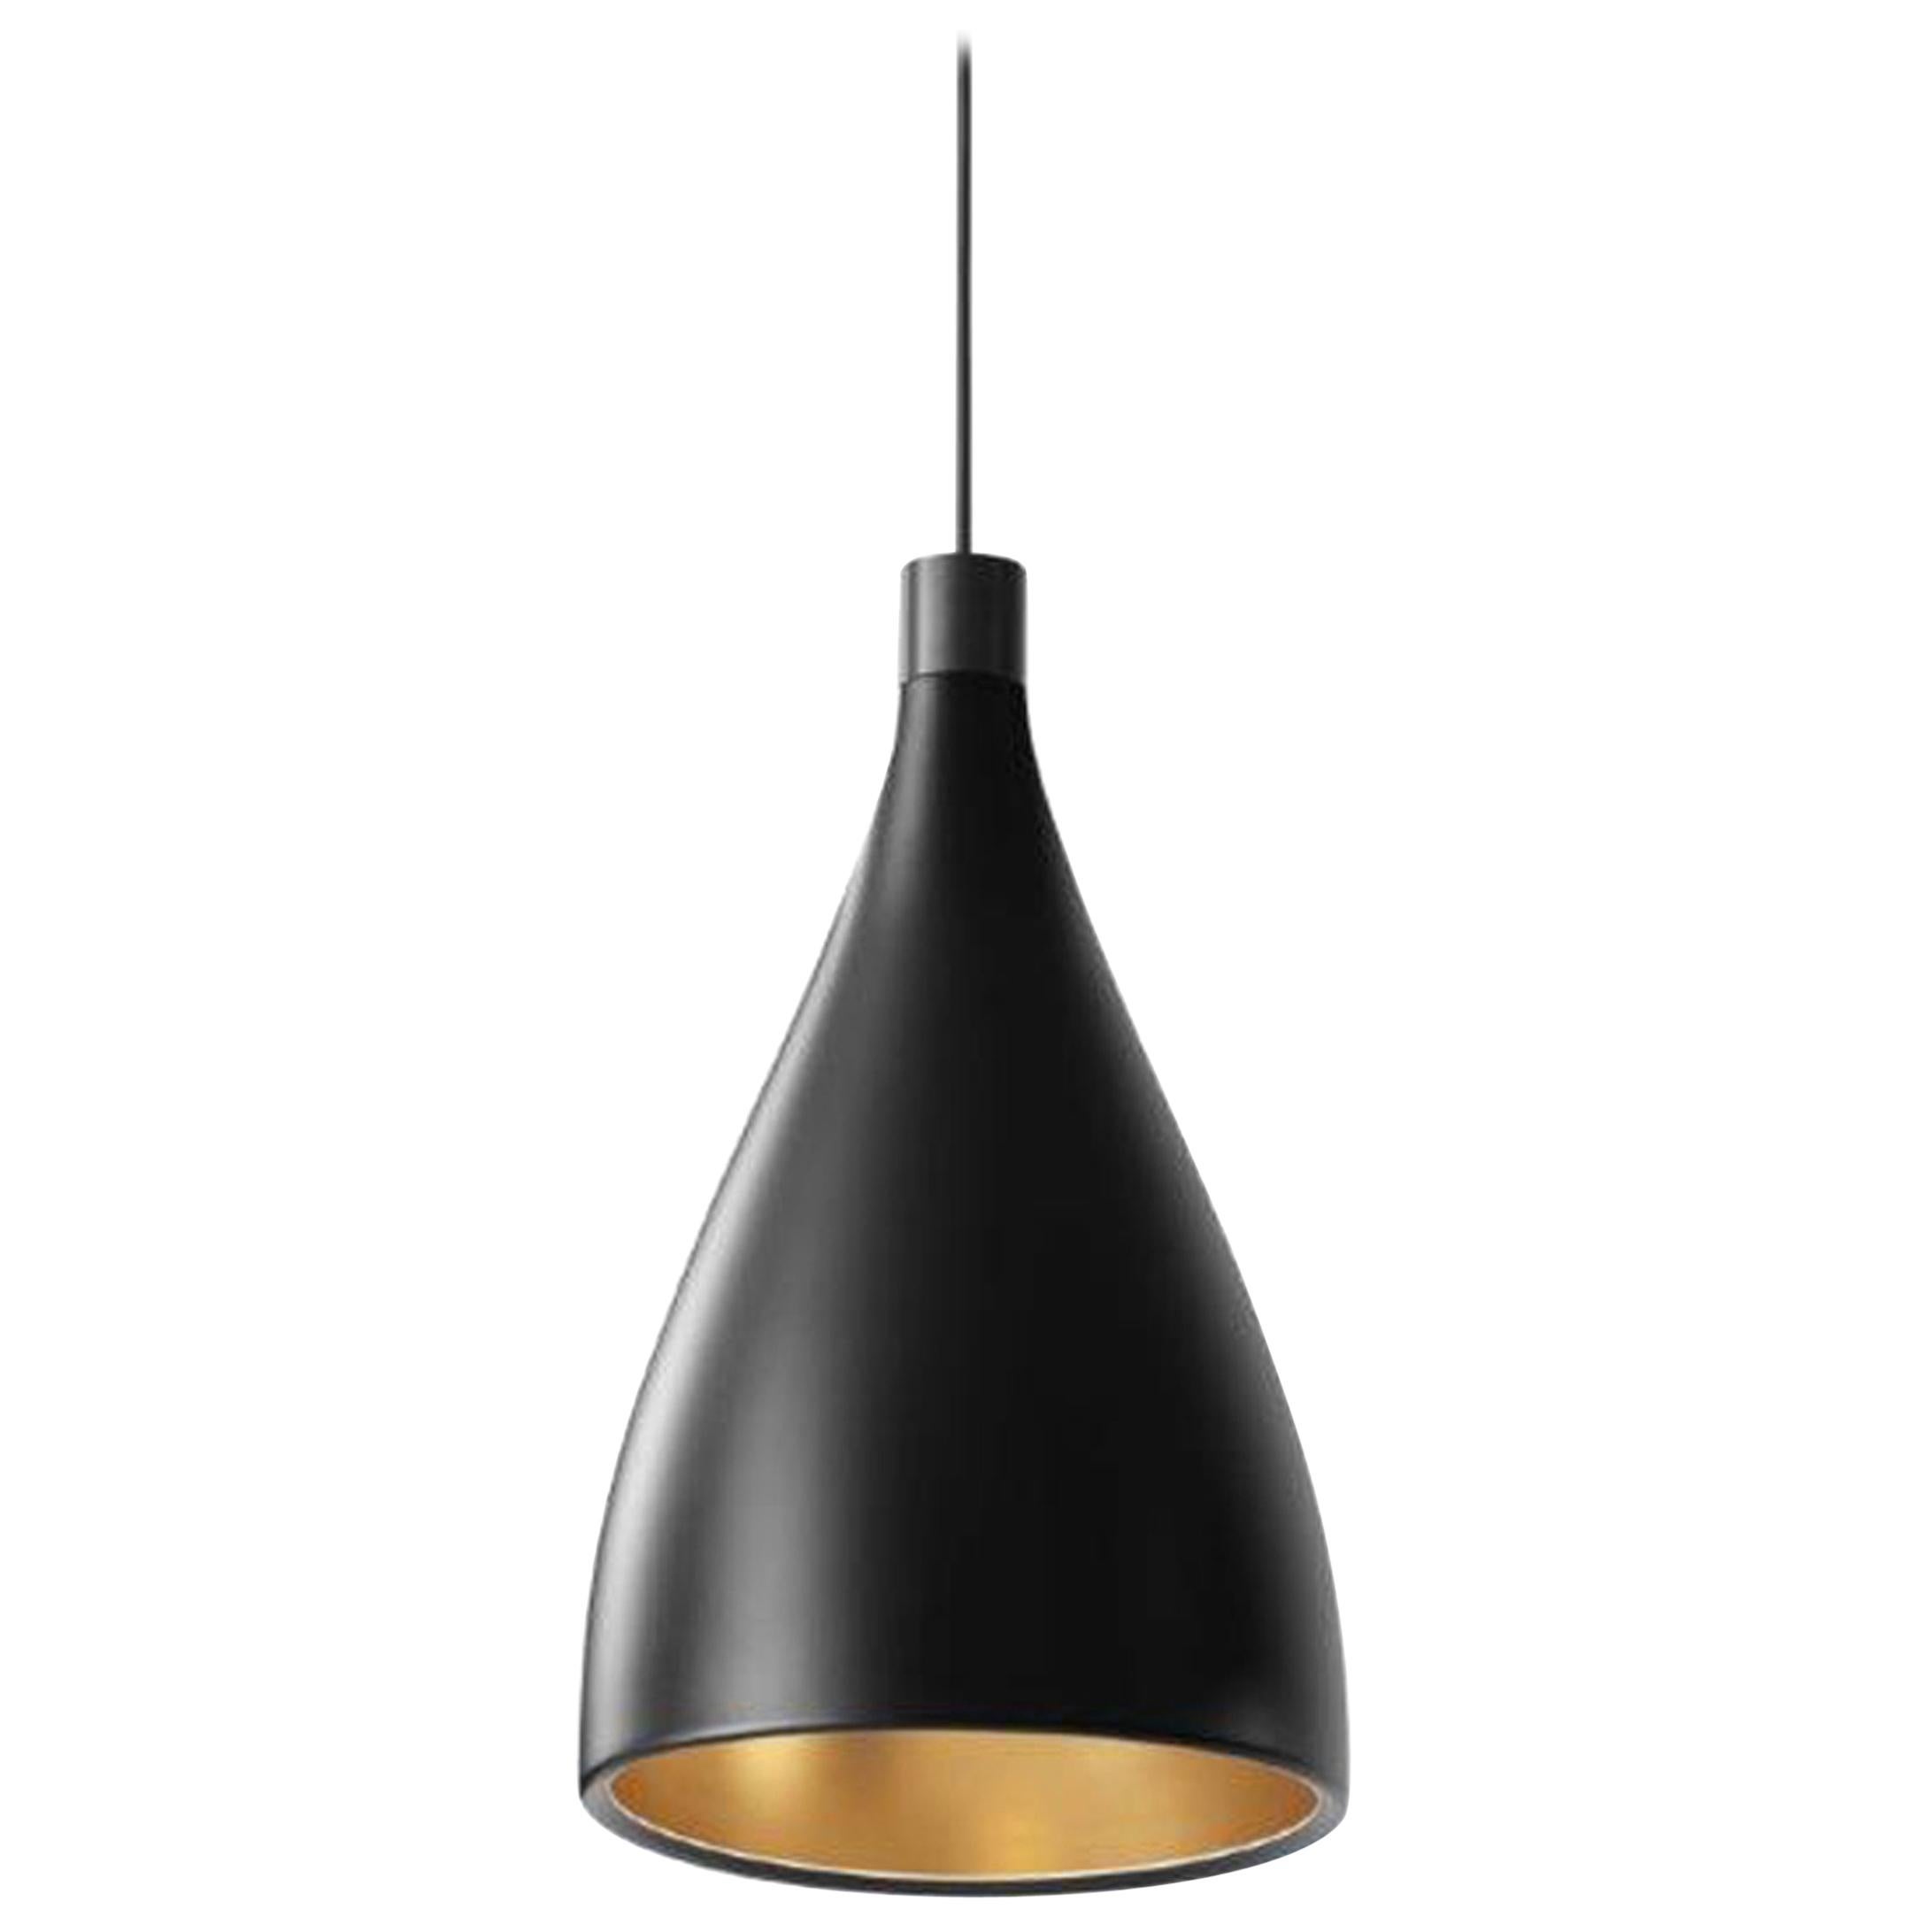 Swell XL Single Narrow LED Pendant Lamp in Black and Brass by Pablo Designs For Sale